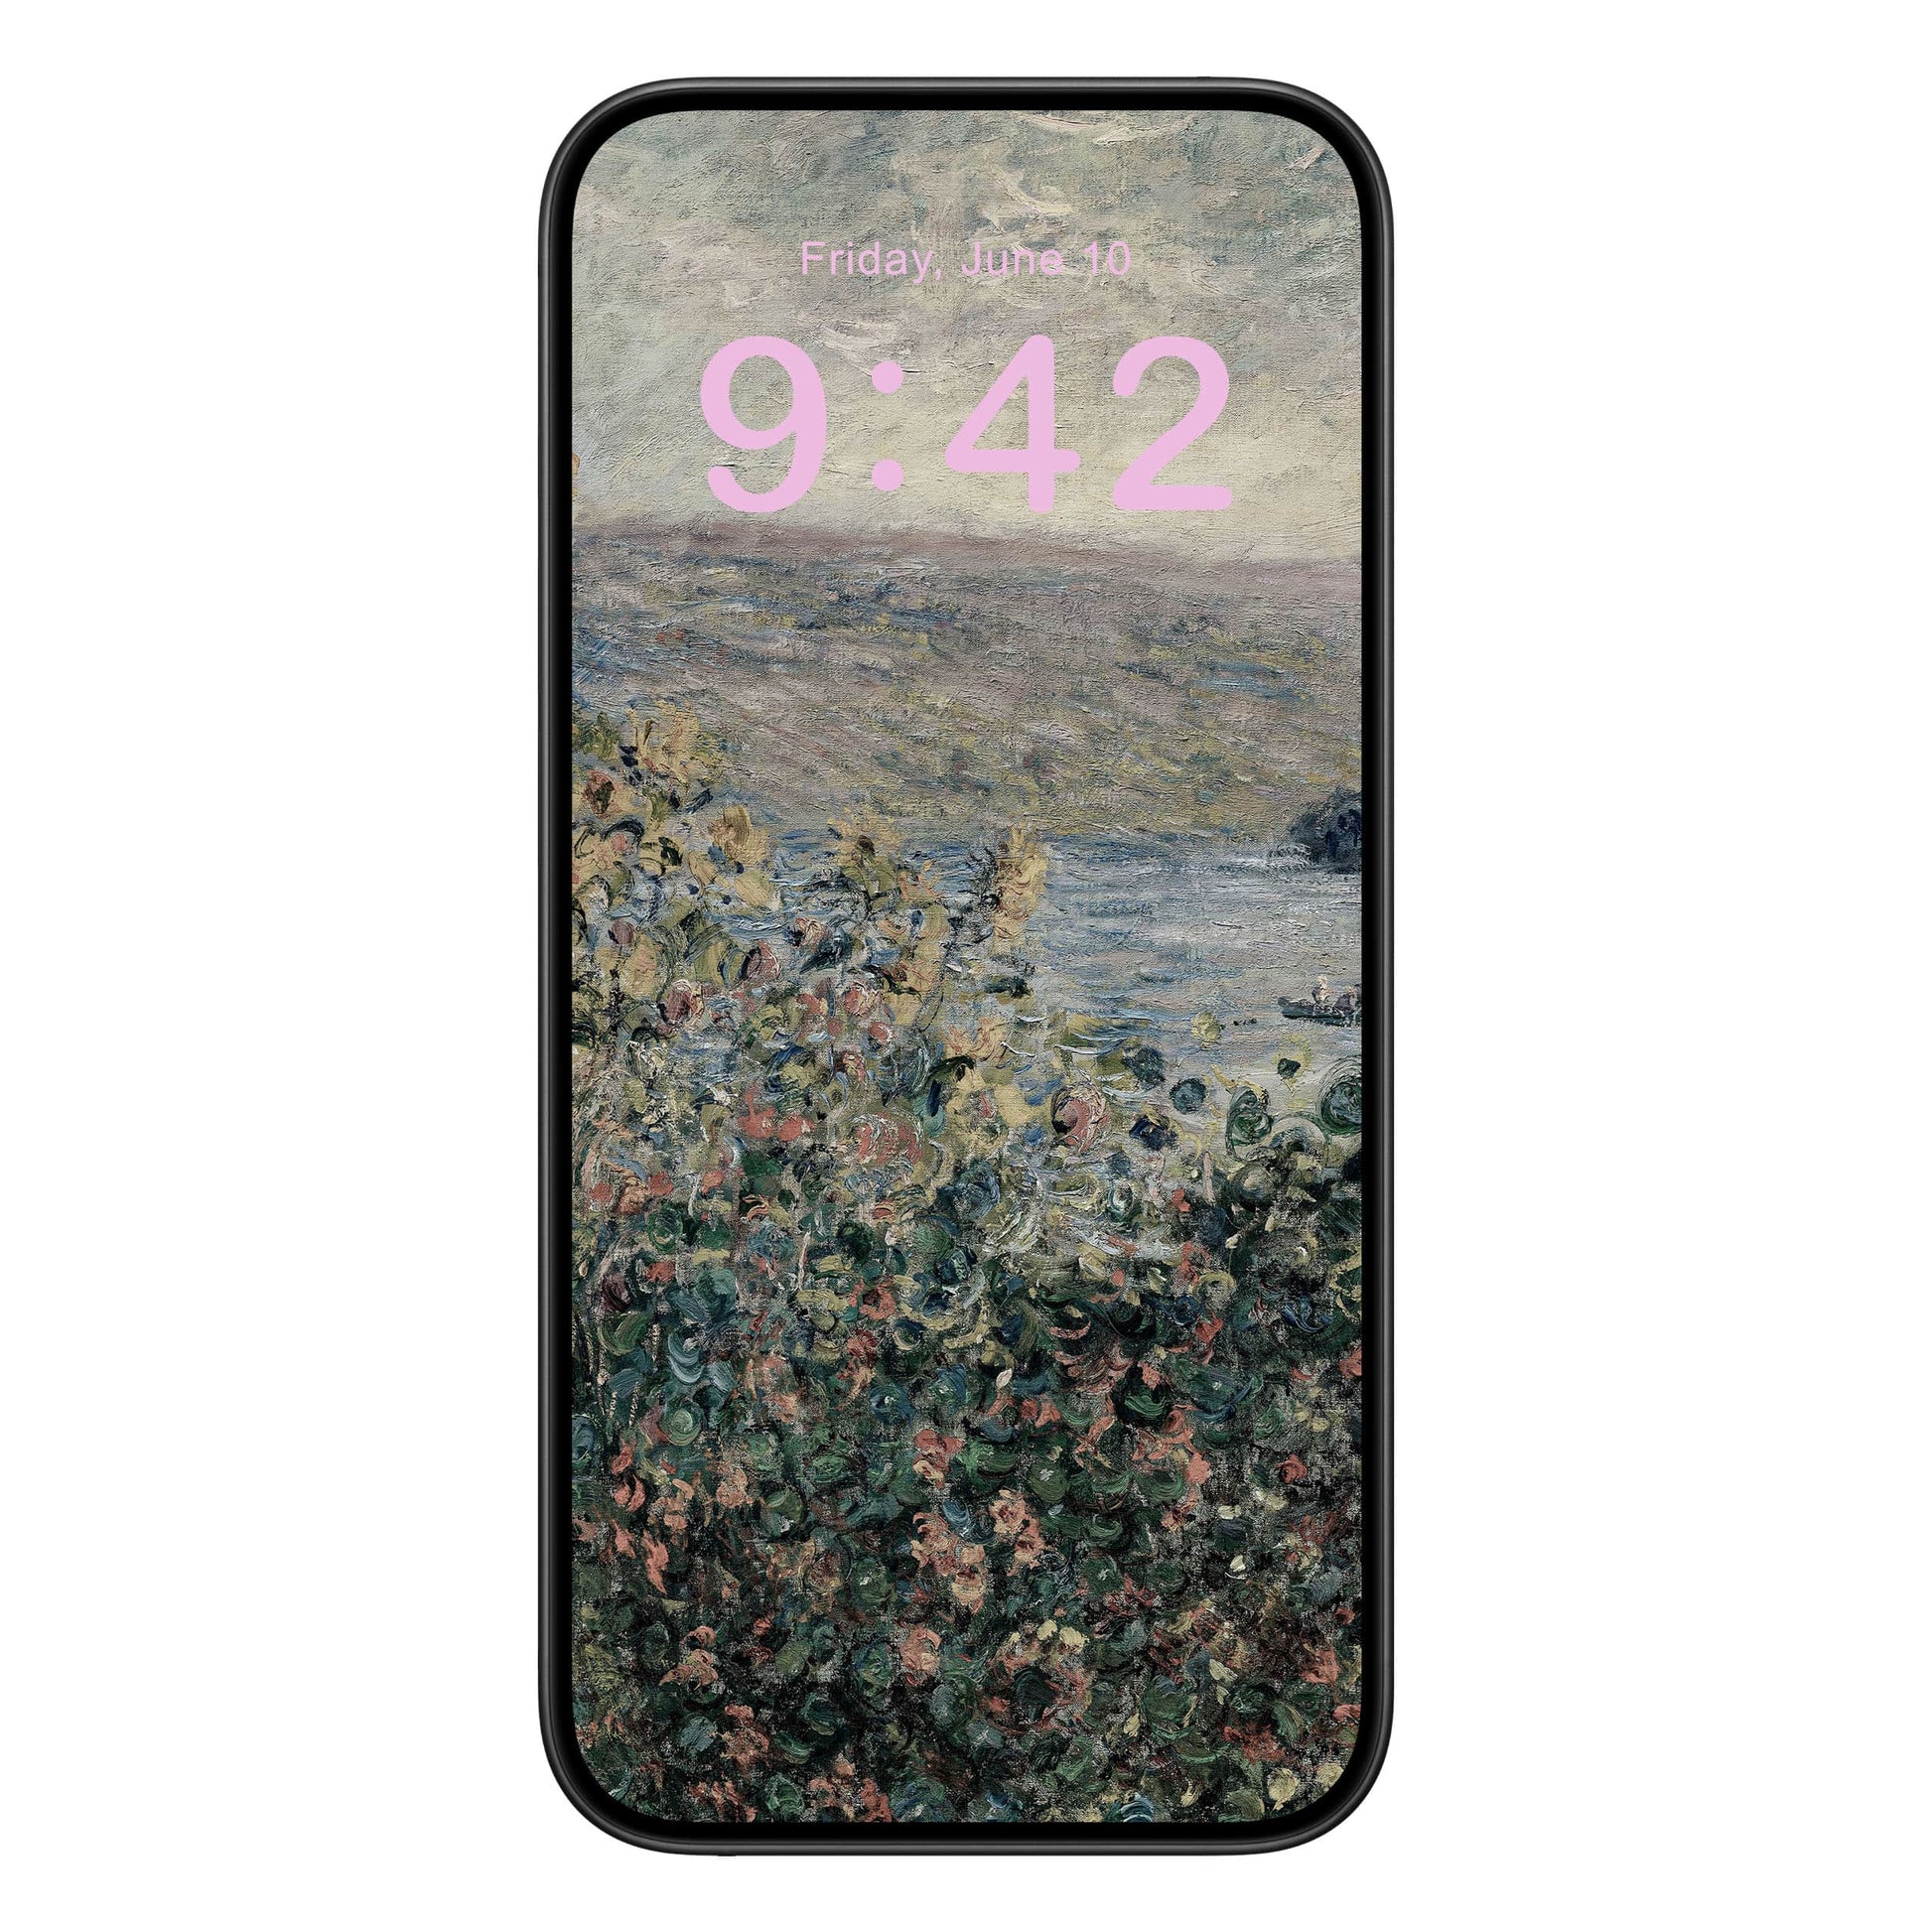 Muted Floral Phone Wallpaper Pink Text